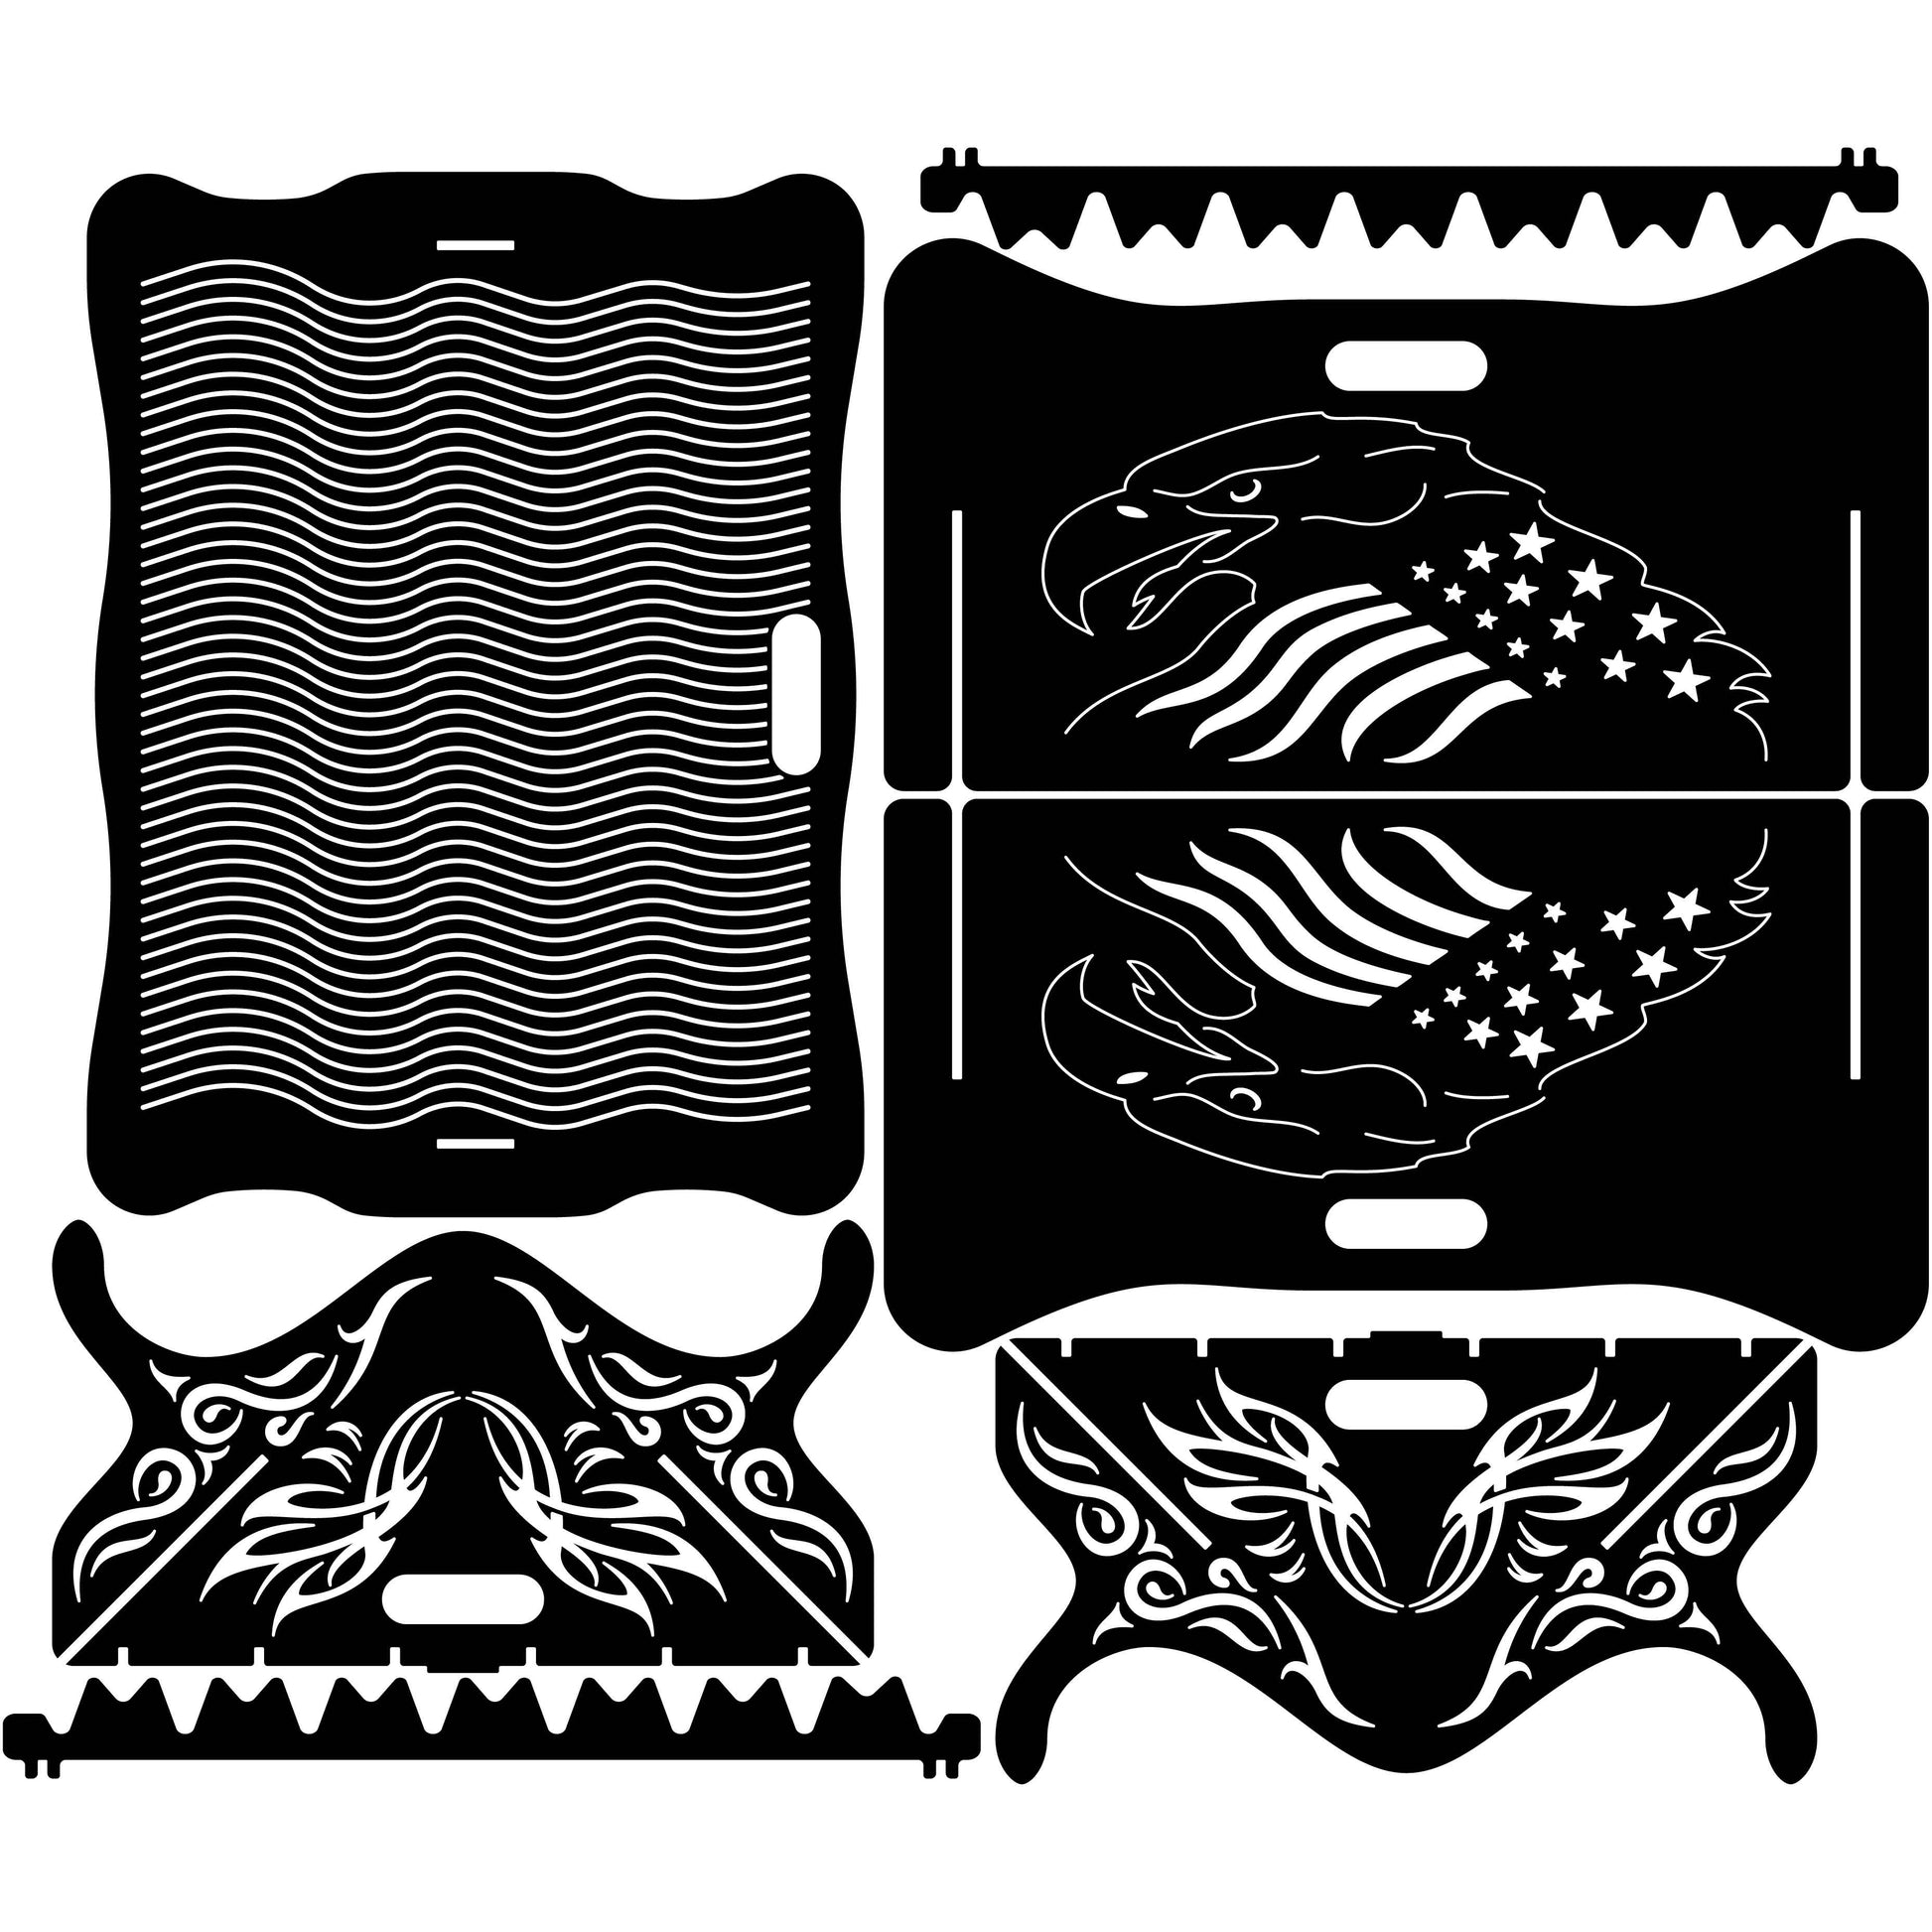 Fire Pit Collapsible Portable USA Eagle Flag-dxf files cut ready for cnc machines